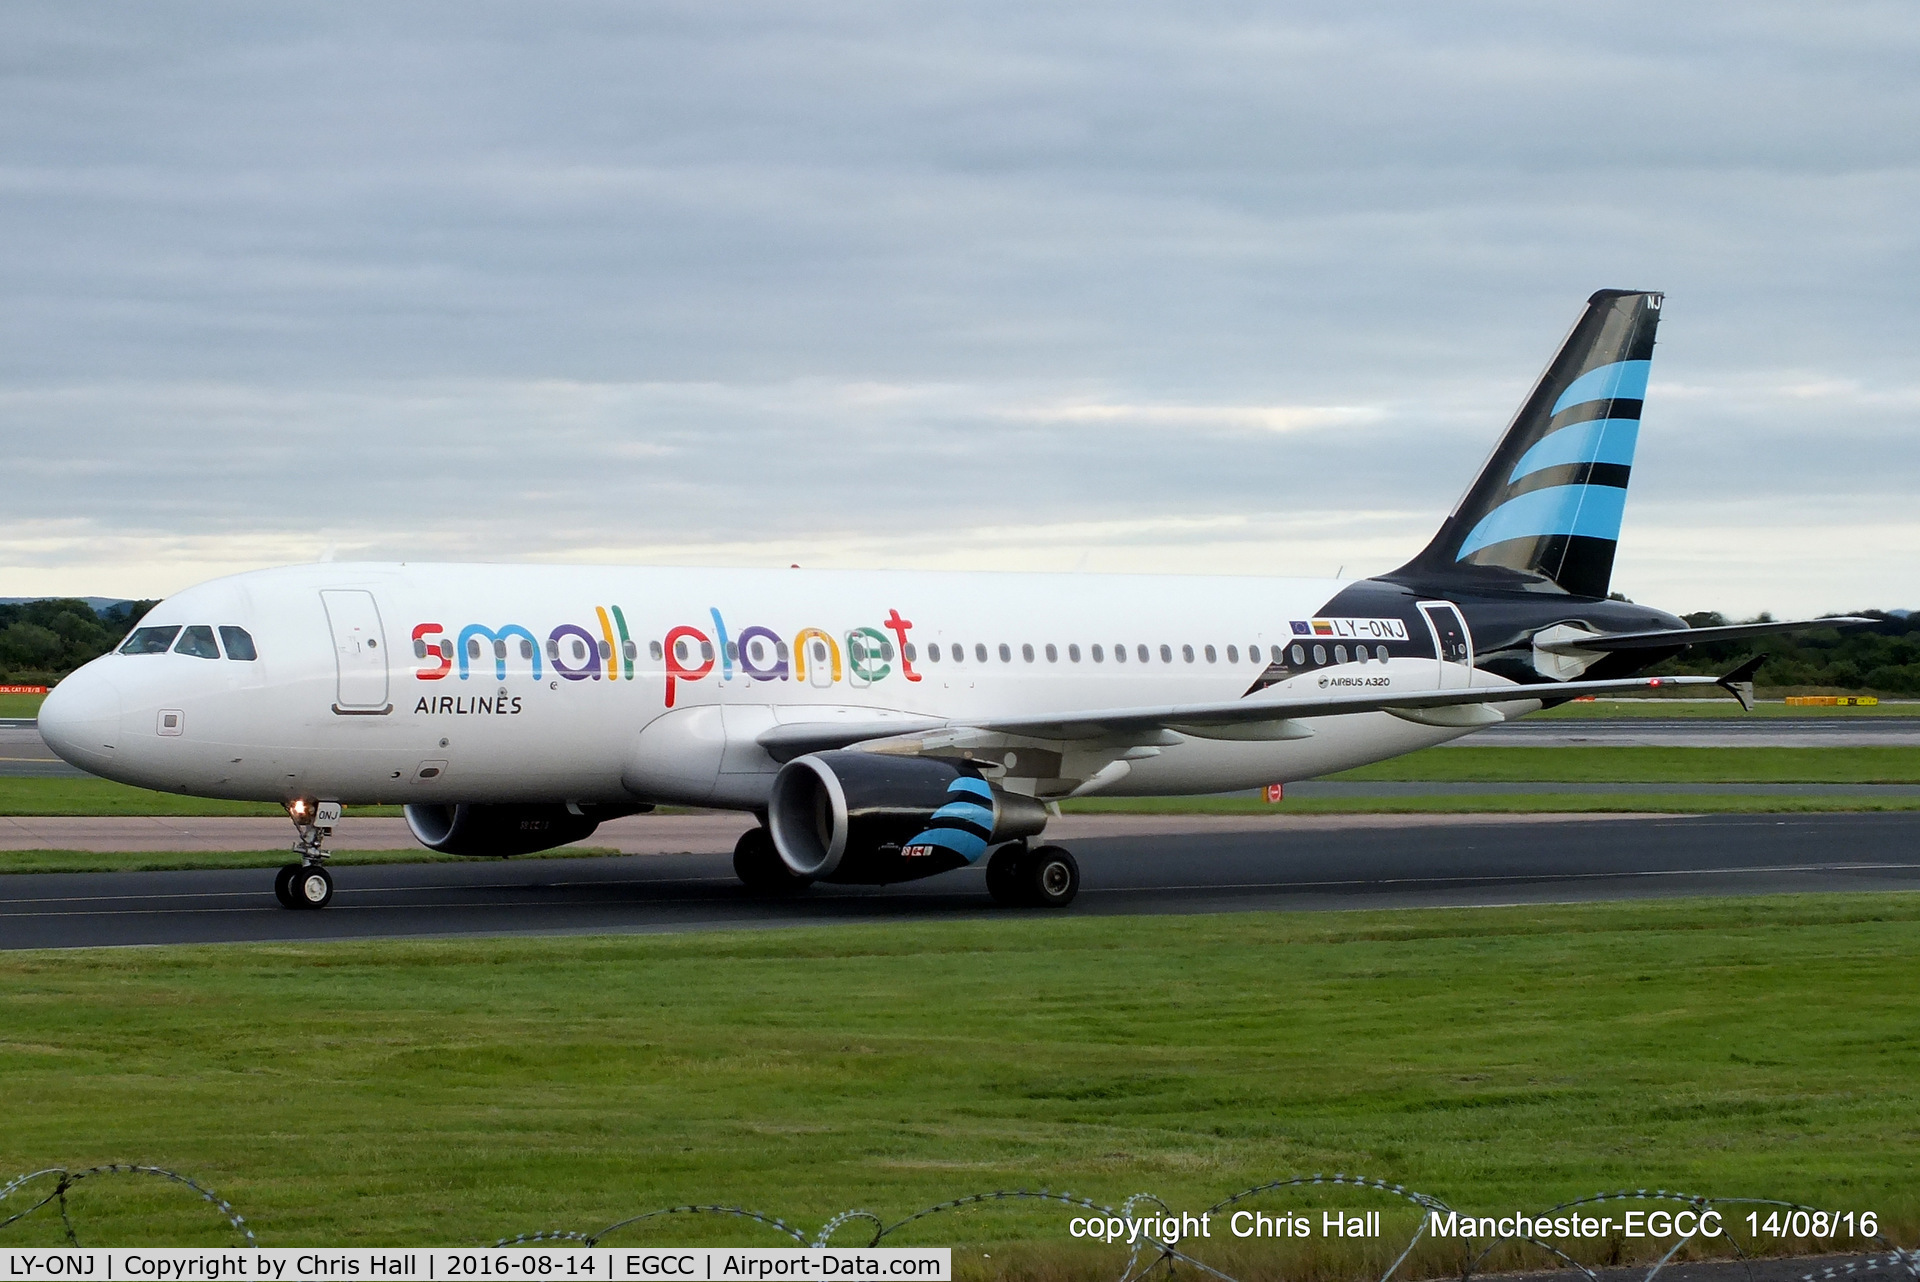 LY-ONJ, 2010 Airbus A320-214 C/N 4203, Small Planet Airlines